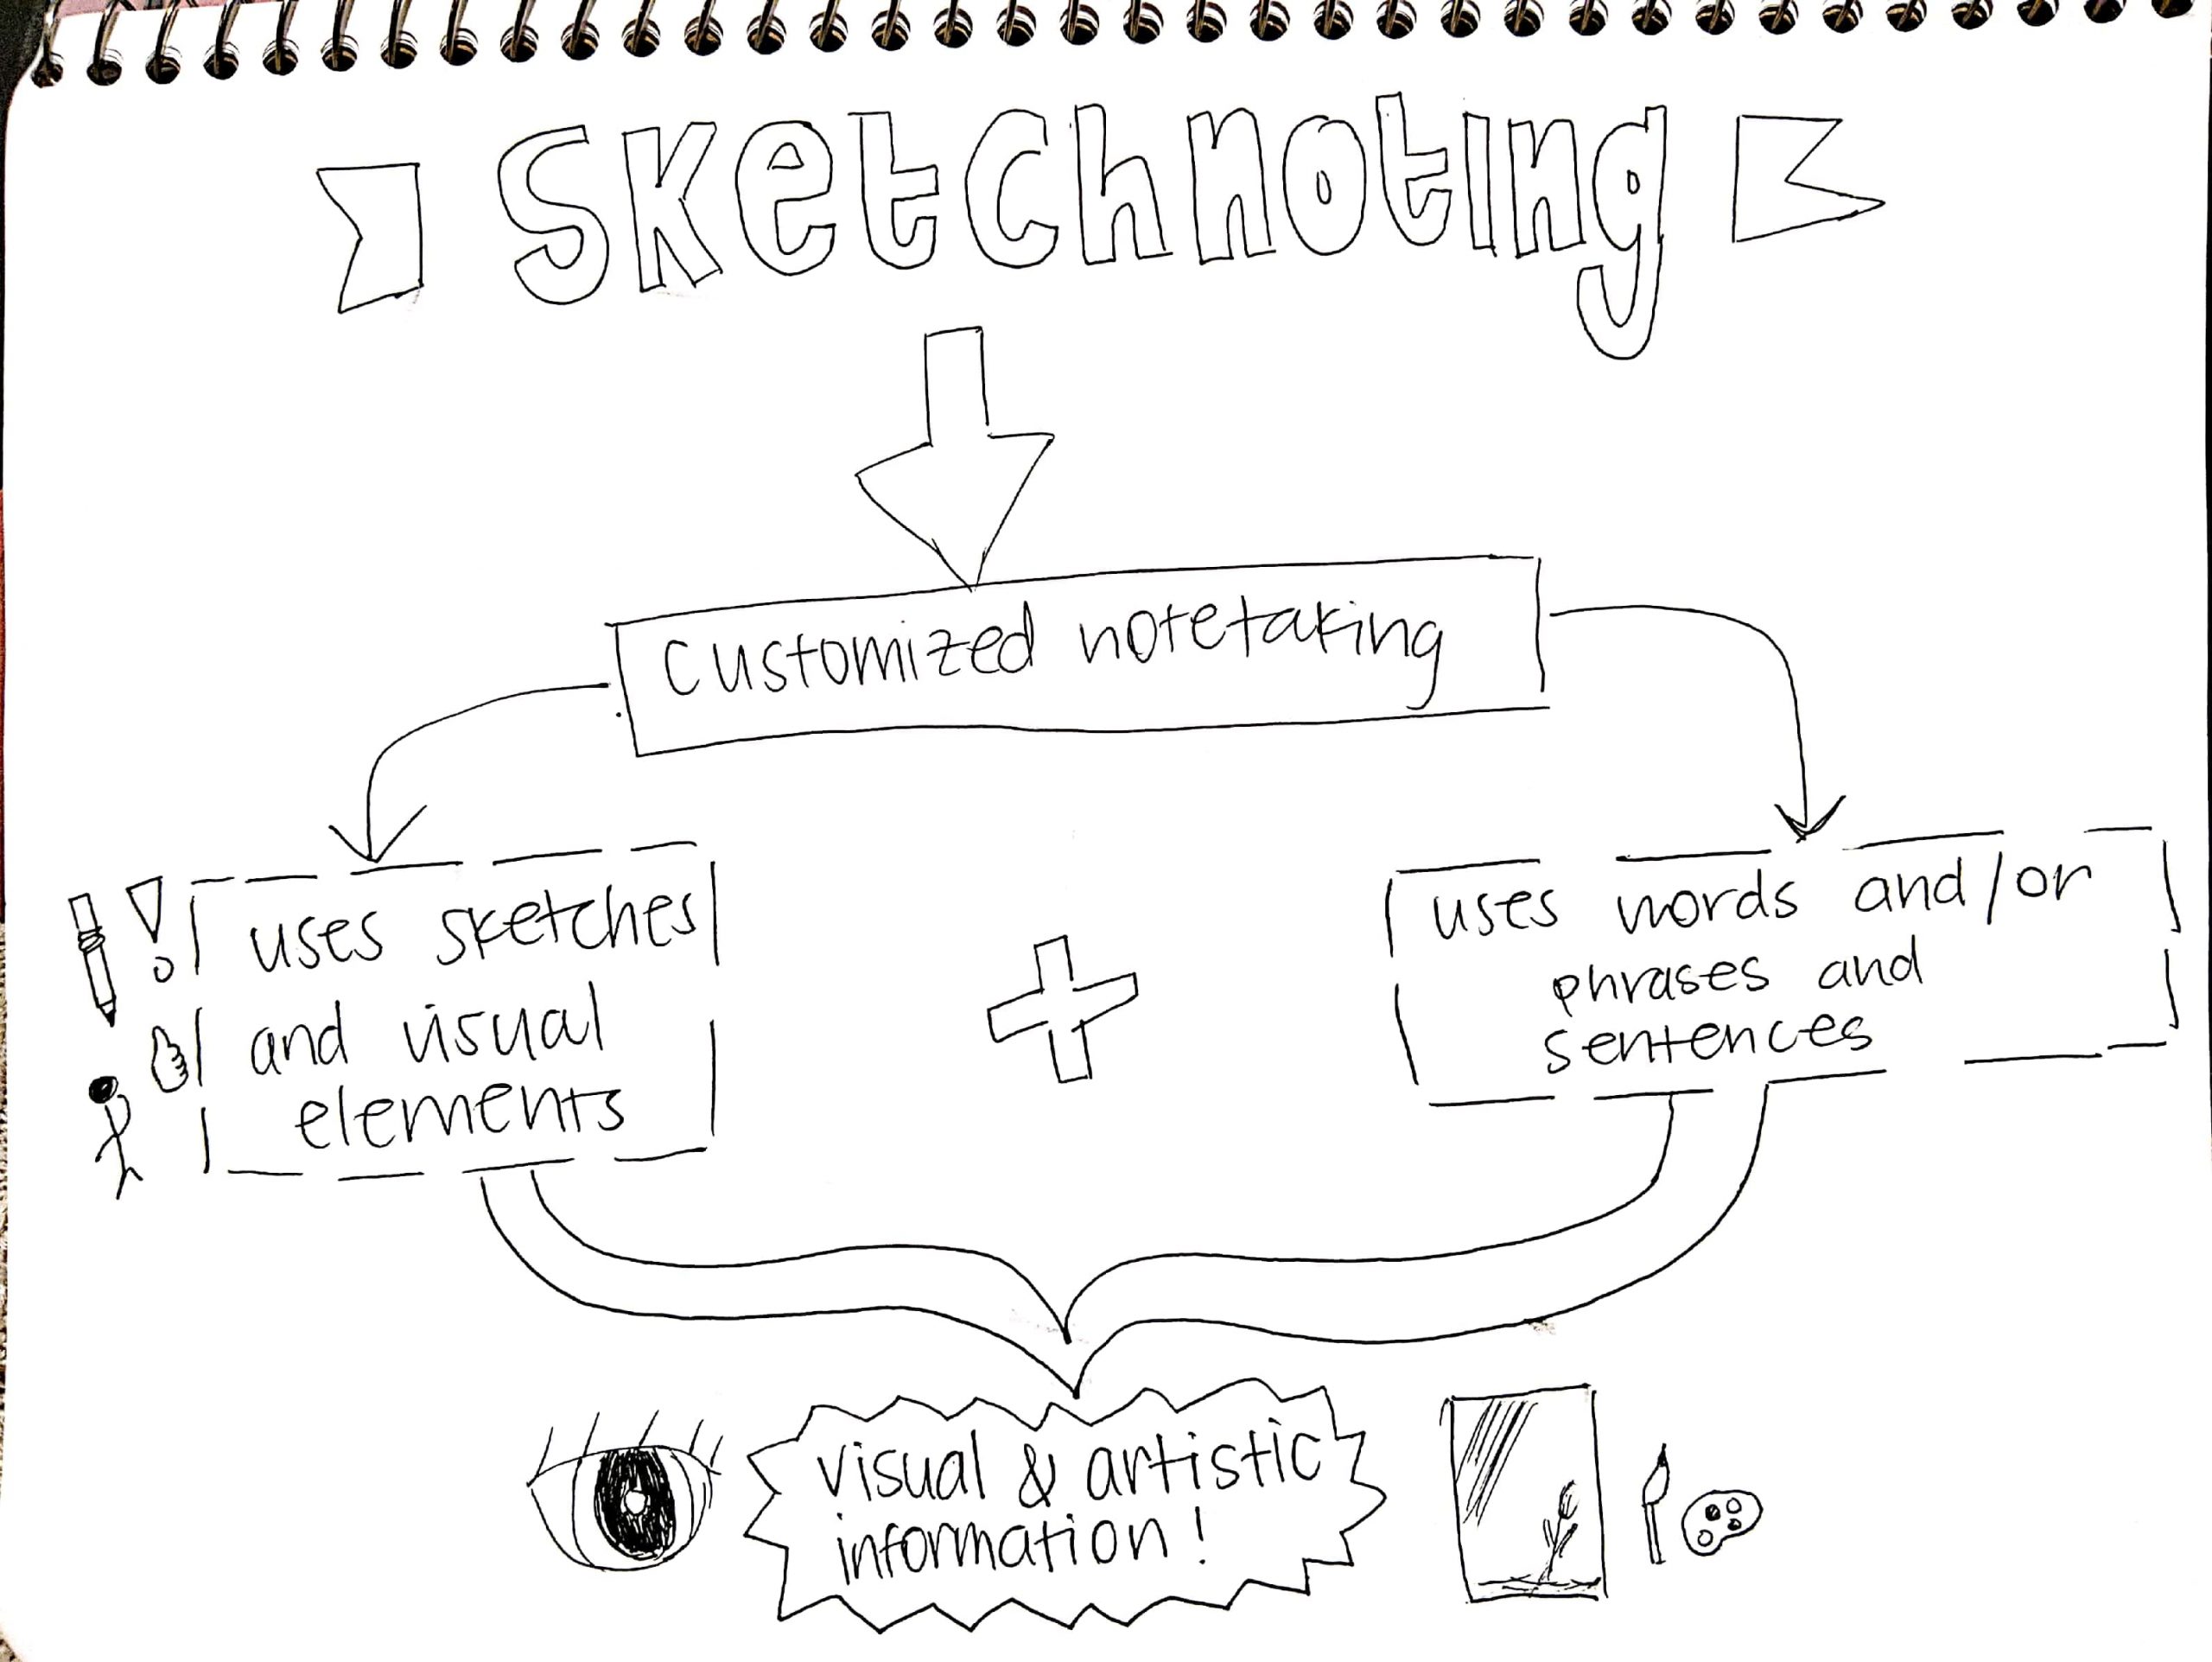 Sketchnoting is customized notetaking using sketches and visual elements, plus words and or phrases and sentences to convey visual and artistic information.